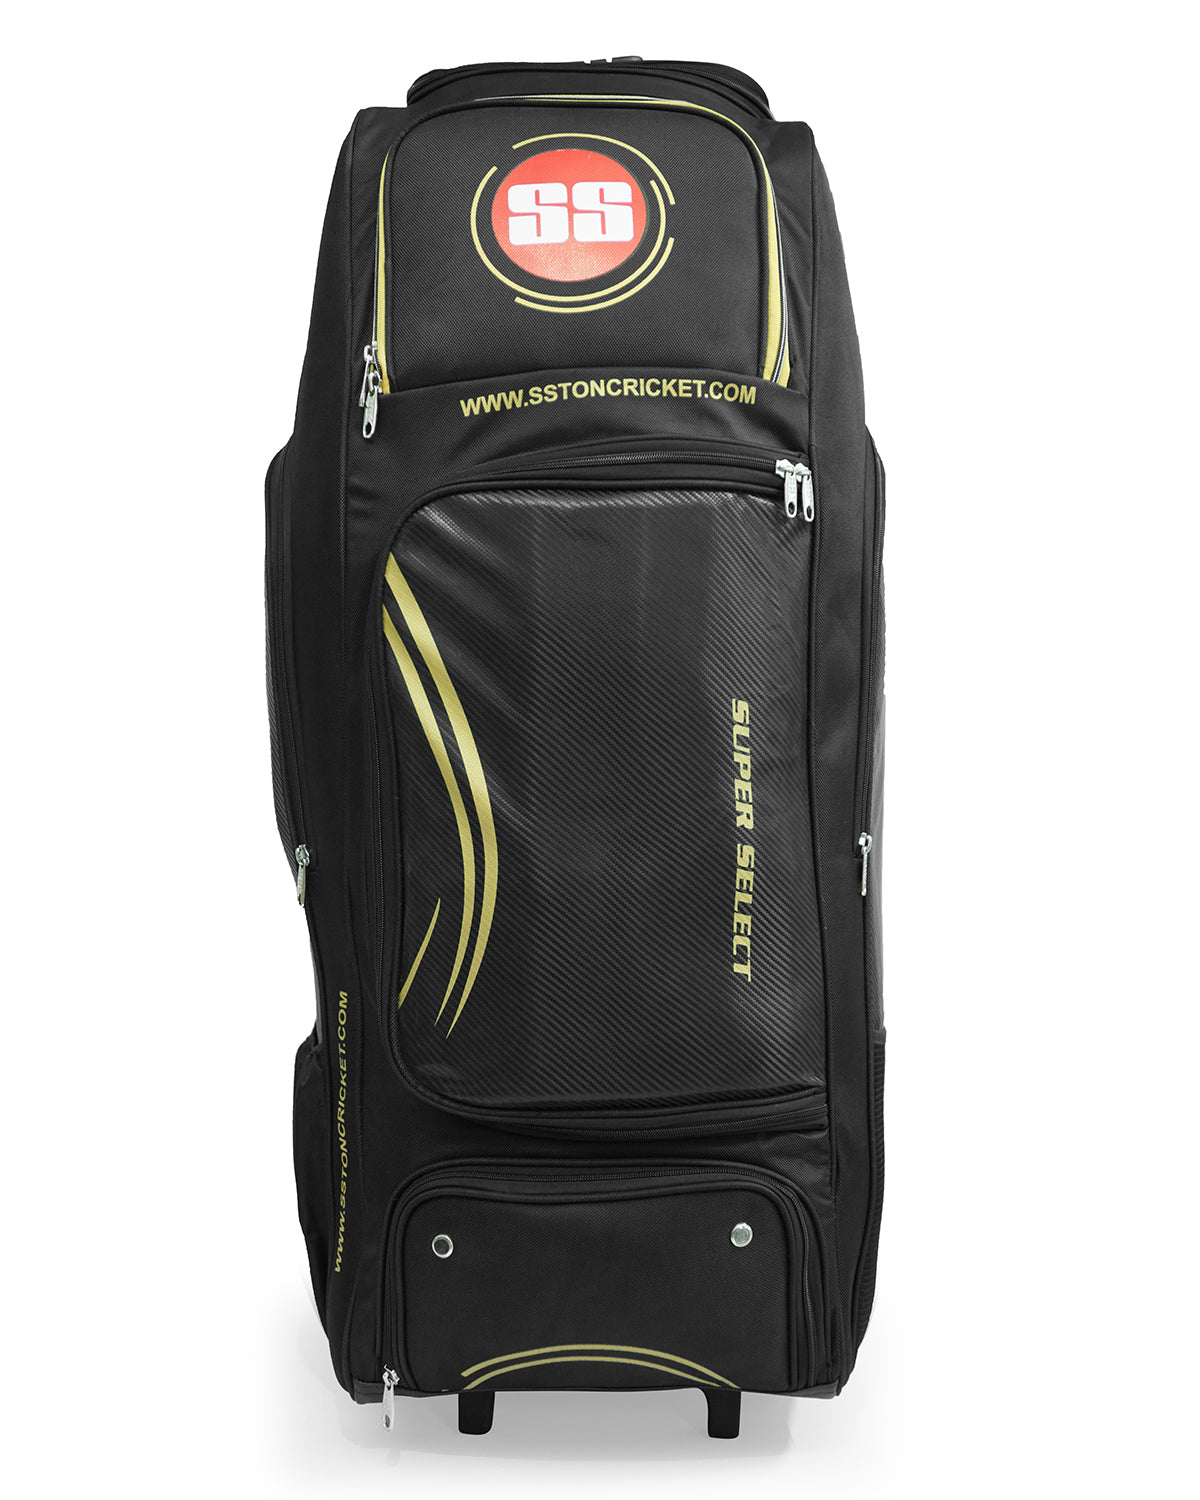 Thrax Super Pack Wheel Cricket Kit Bag, Army Color : Amazon.in: Sports,  Fitness & Outdoors